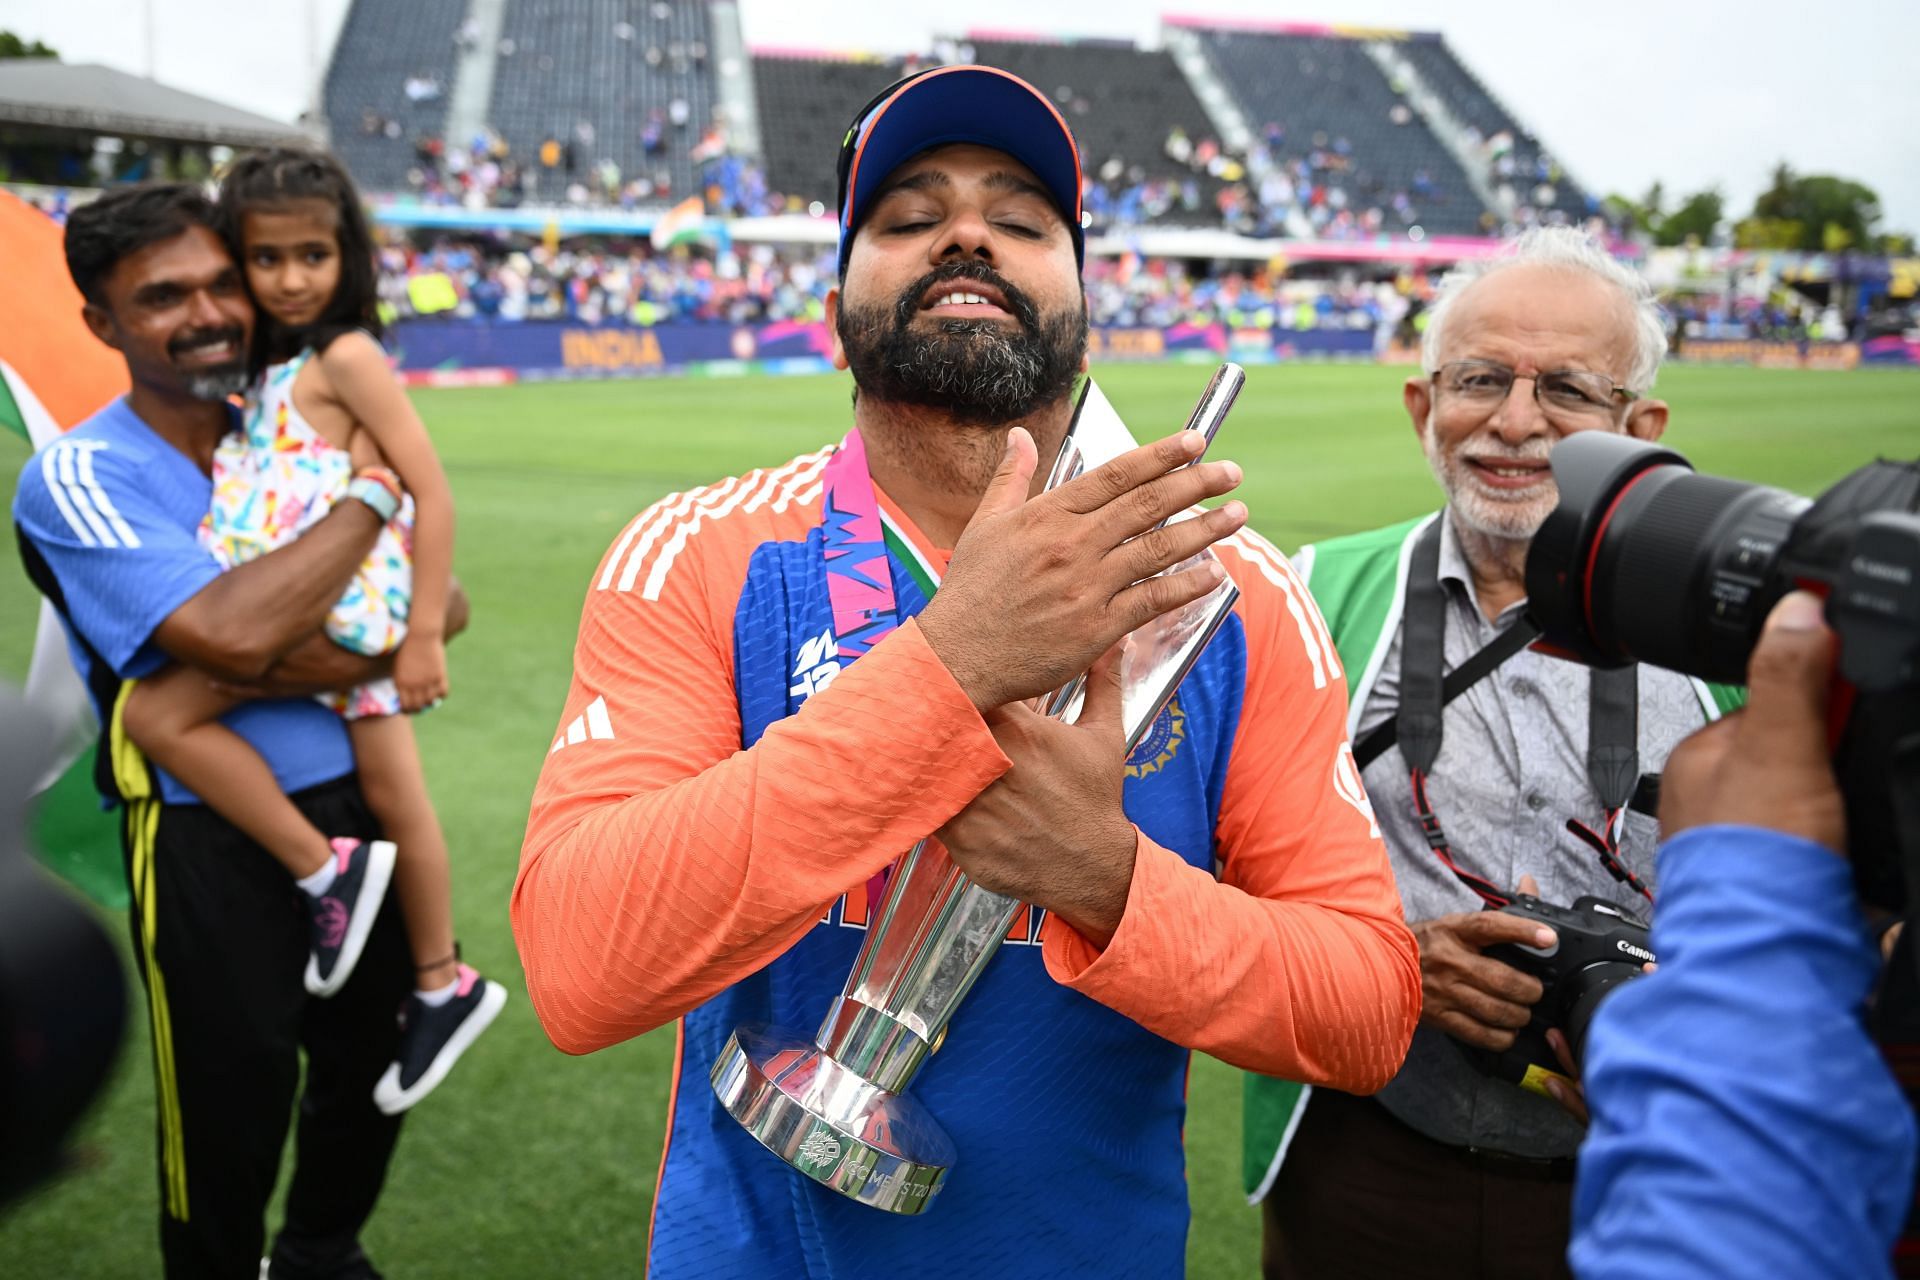 [Watch] Fans in USA react with excitement on getting a glimpse of T20 World Cup-winning captain Rohit Sharma